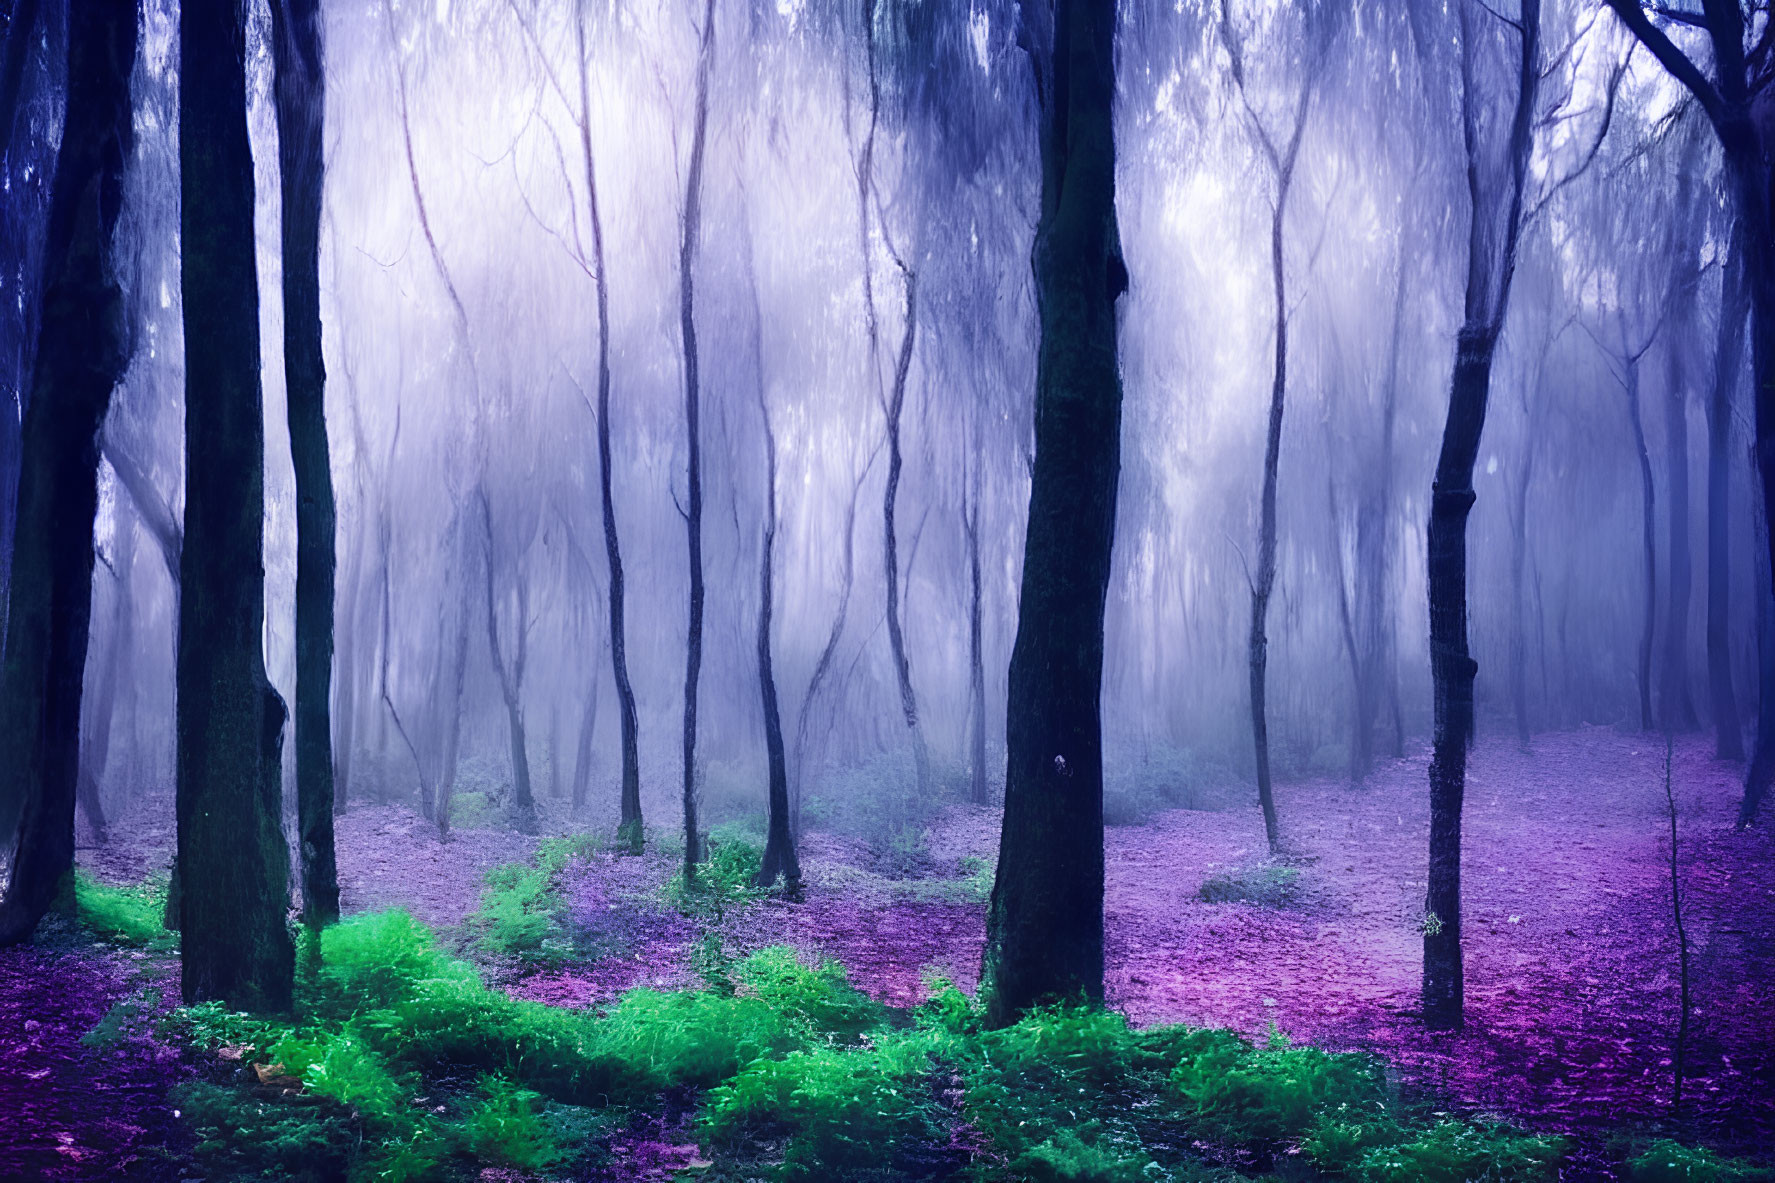 Purple-Hued Forest with Fog, Green Undergrowth, and Silhouetted Trees